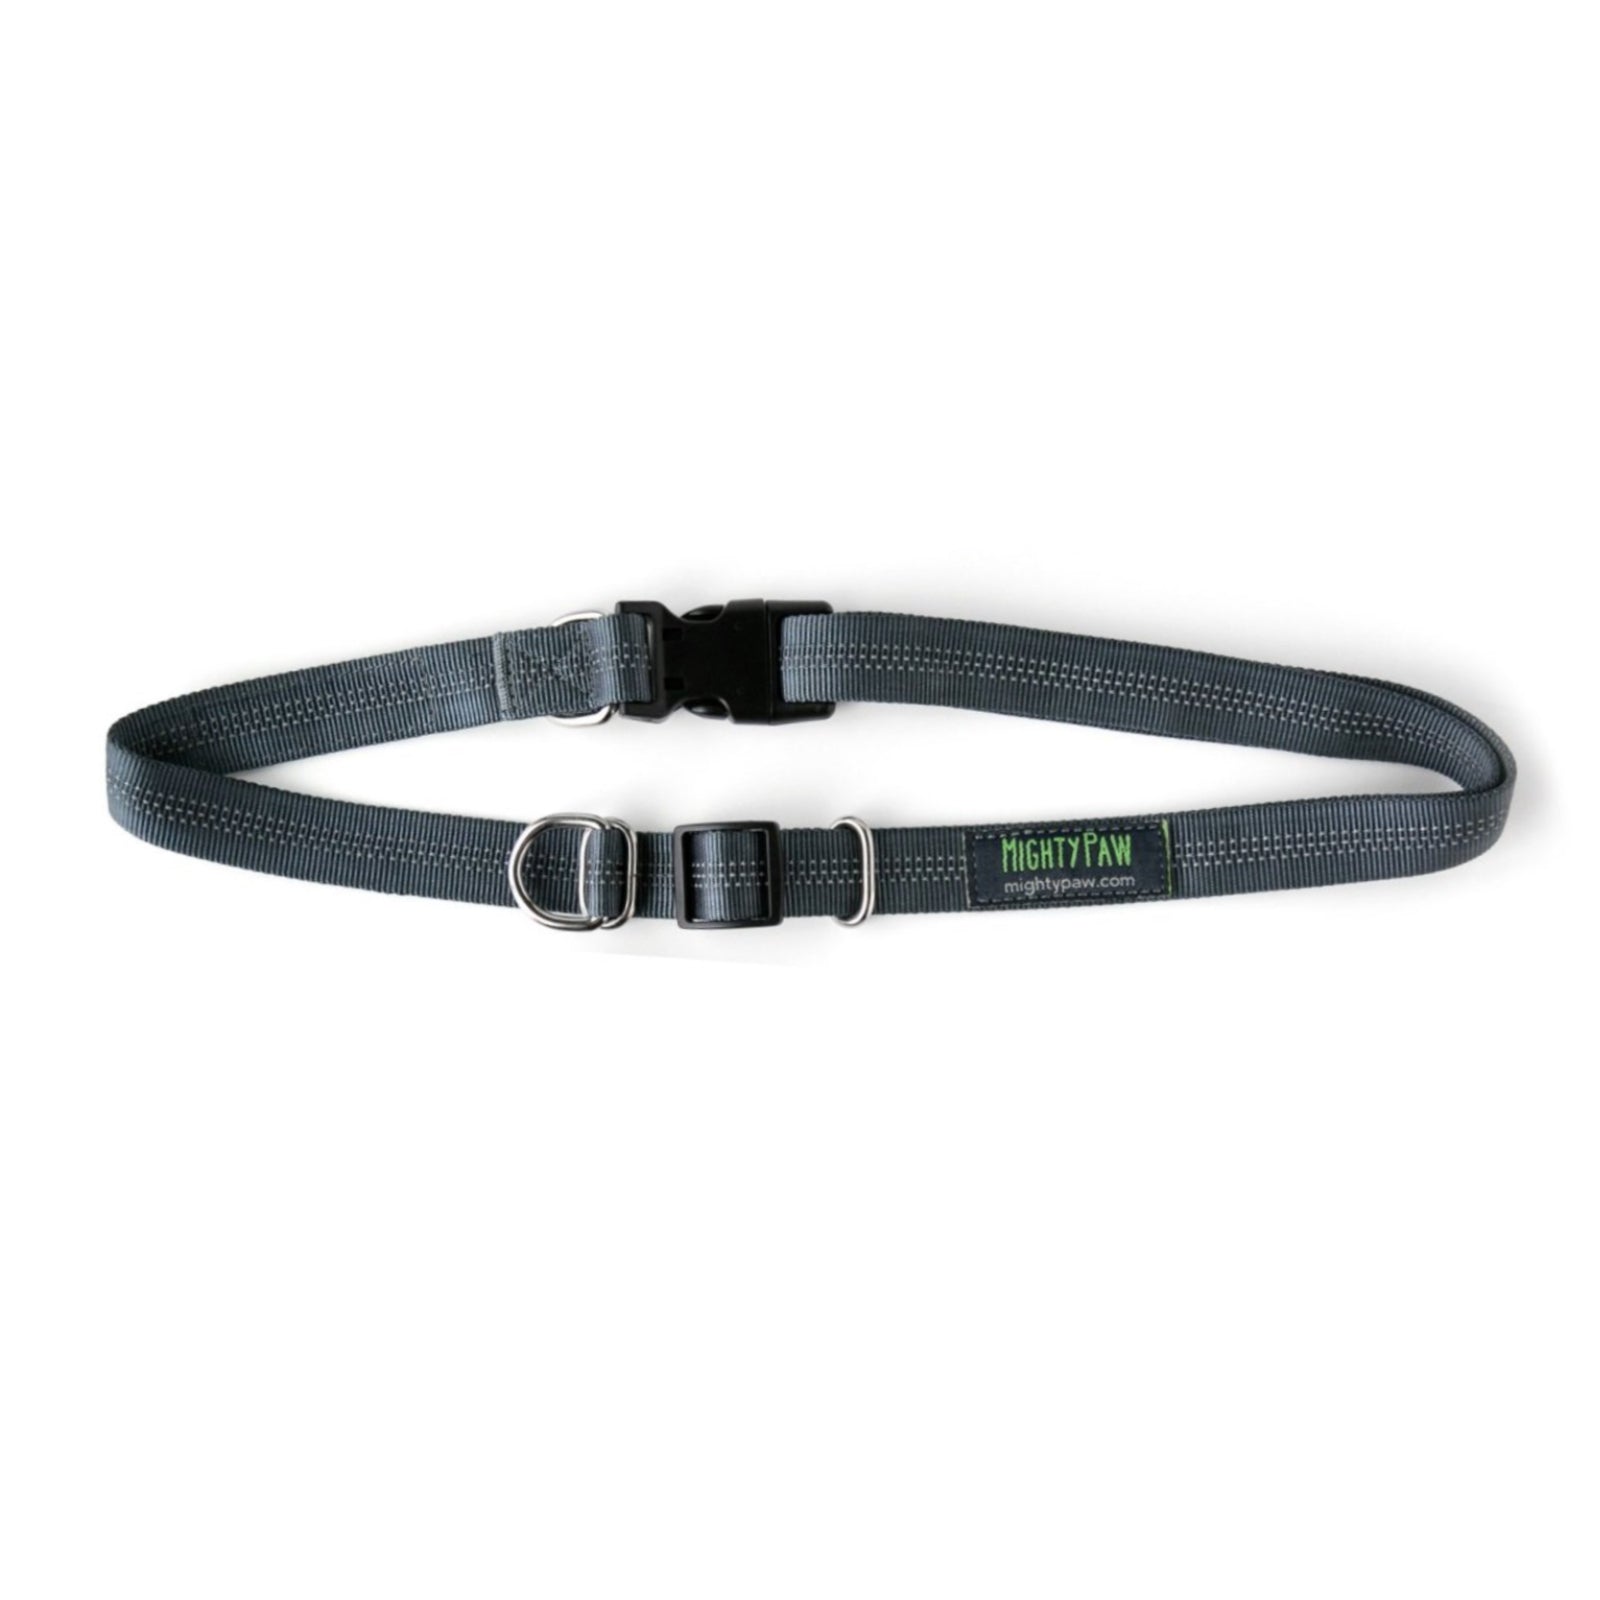 Lightweight Adjustable Bungee Belt with Rotating D-Ring